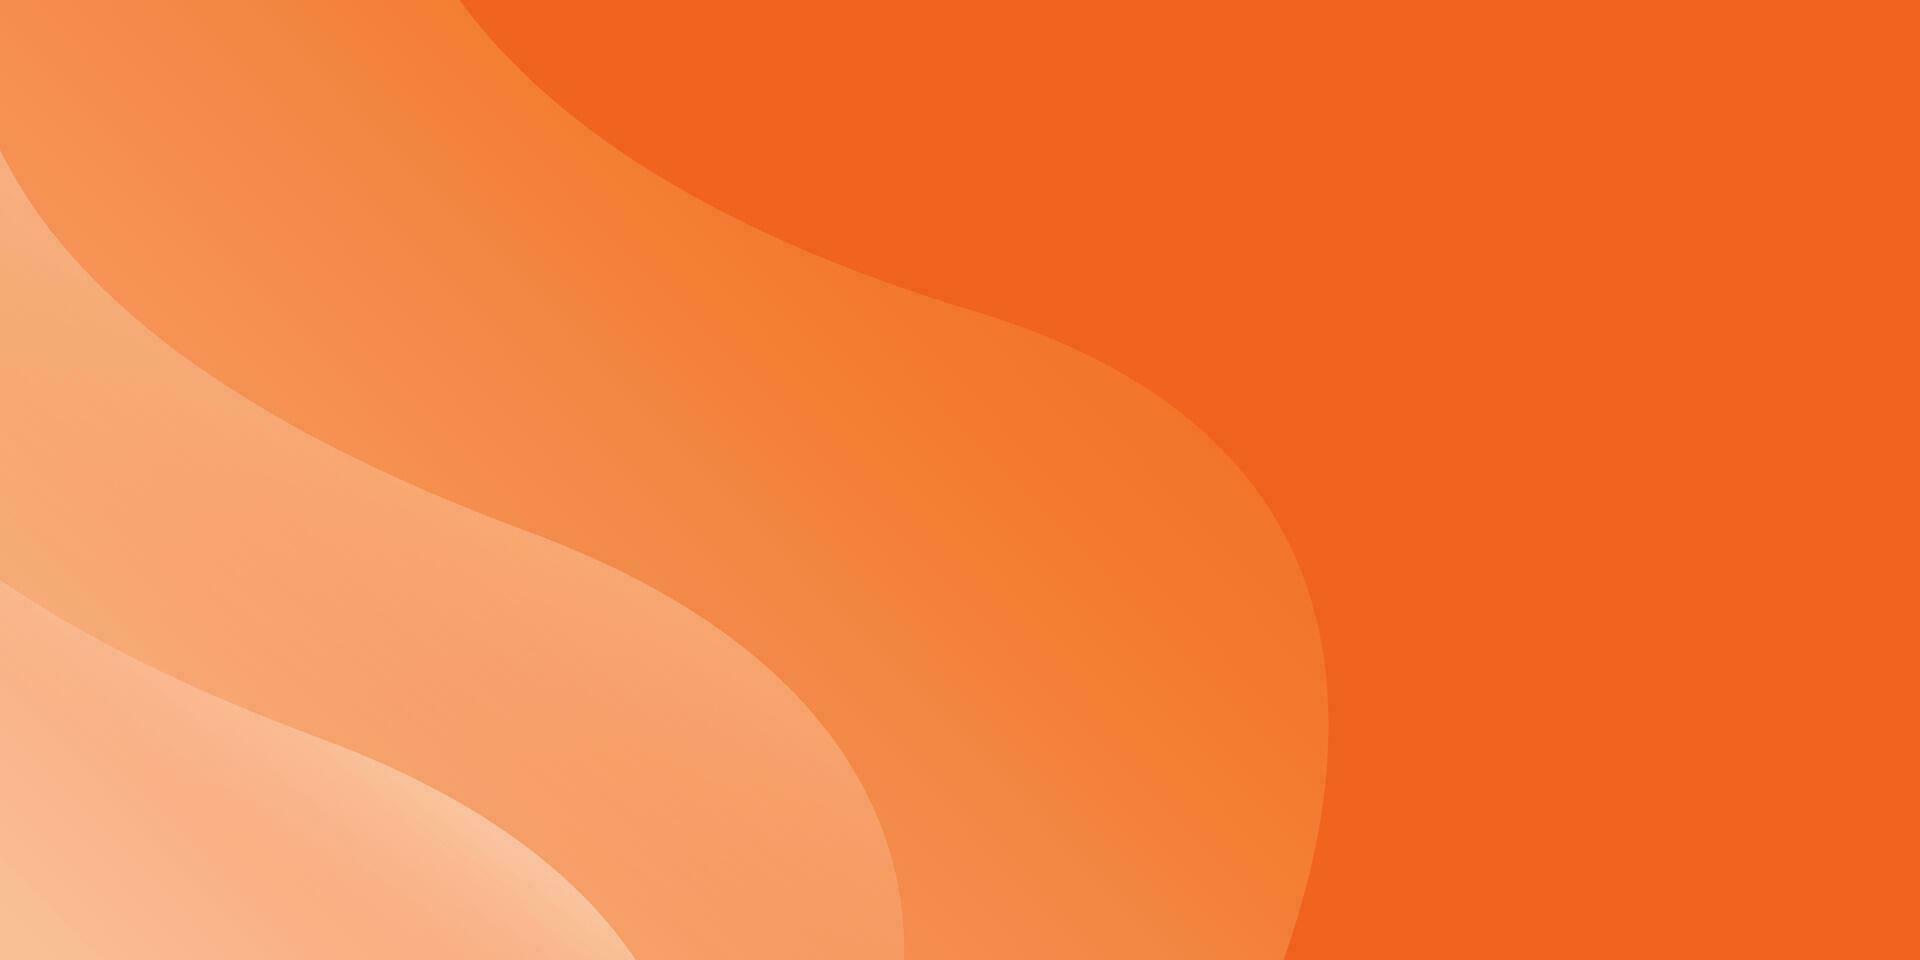 Minimal geometric abstract background. Orange elements with fluid gradient. Dynamic shapes composition. Eps10 vector